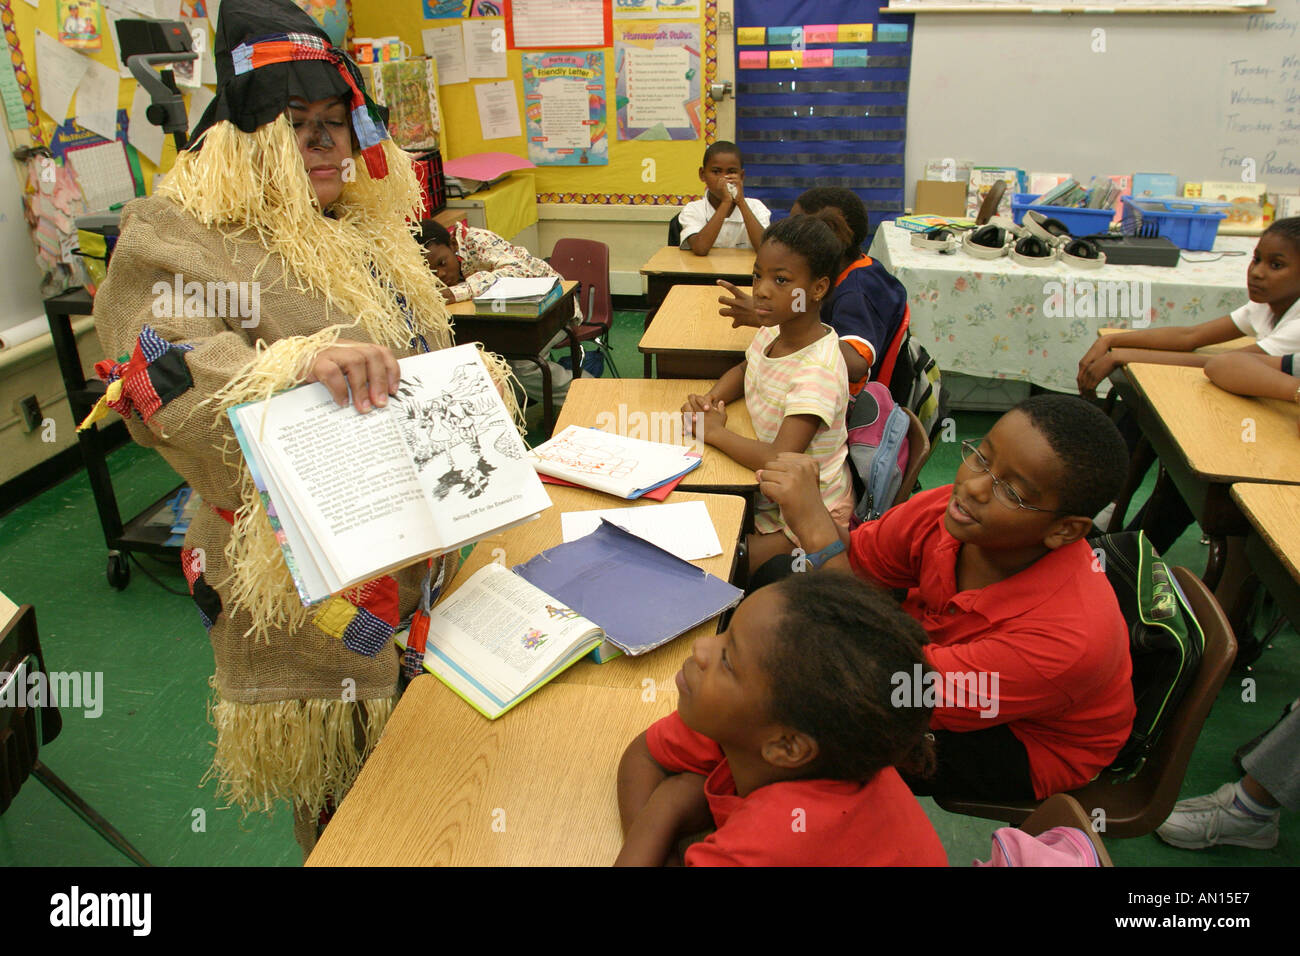 Miami Florida,Overtown,Frederick Douglass Elementary,teachers,dress,outfit,literary costume,reading,education,fictional character,reading,student stud Stock Photo